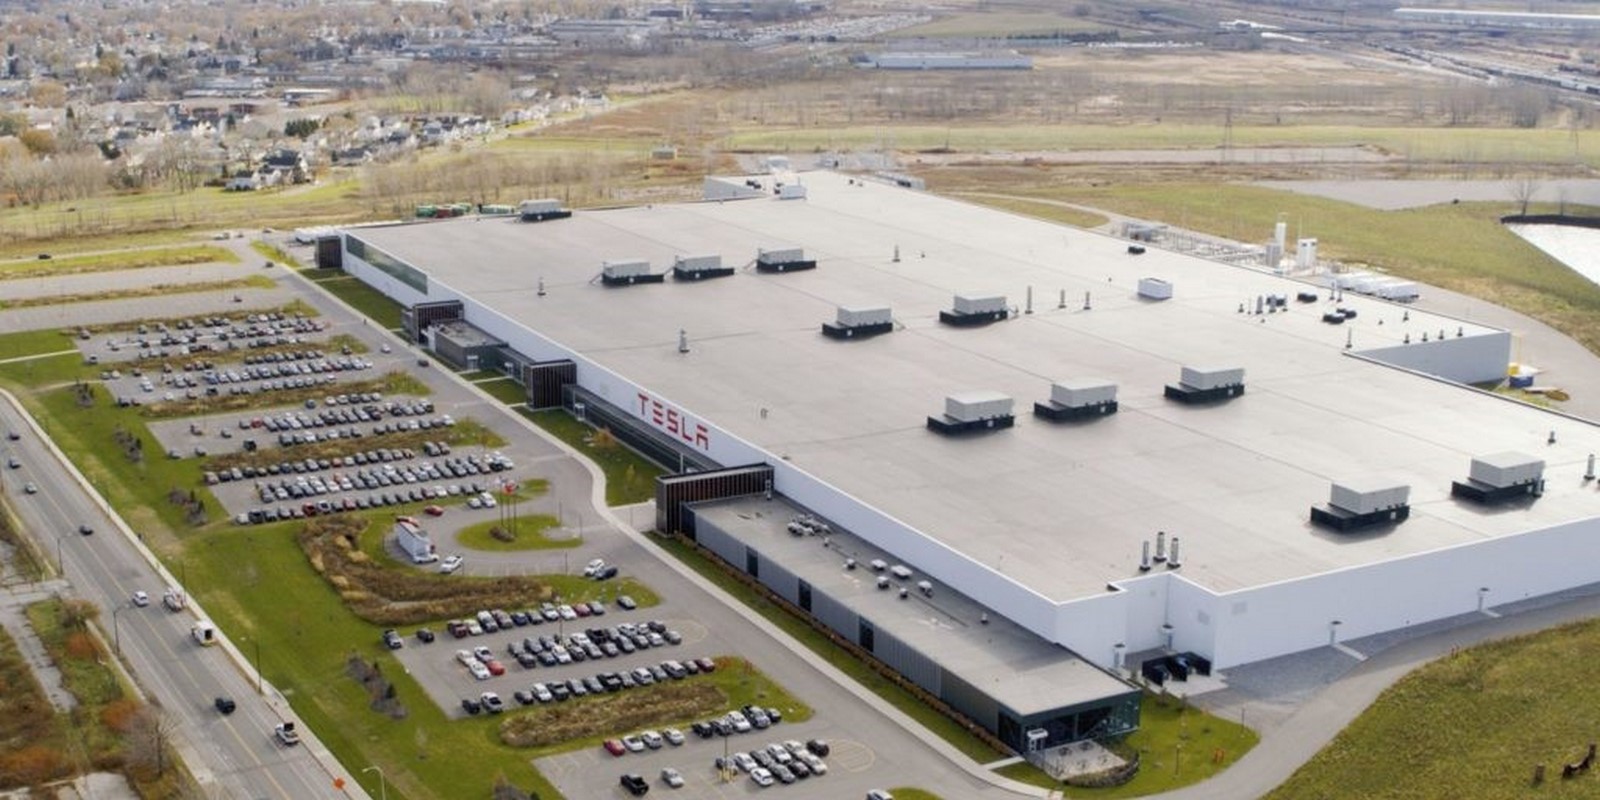 10 Things you did not know about Elon Musk’s Gigafactory - Sheet3